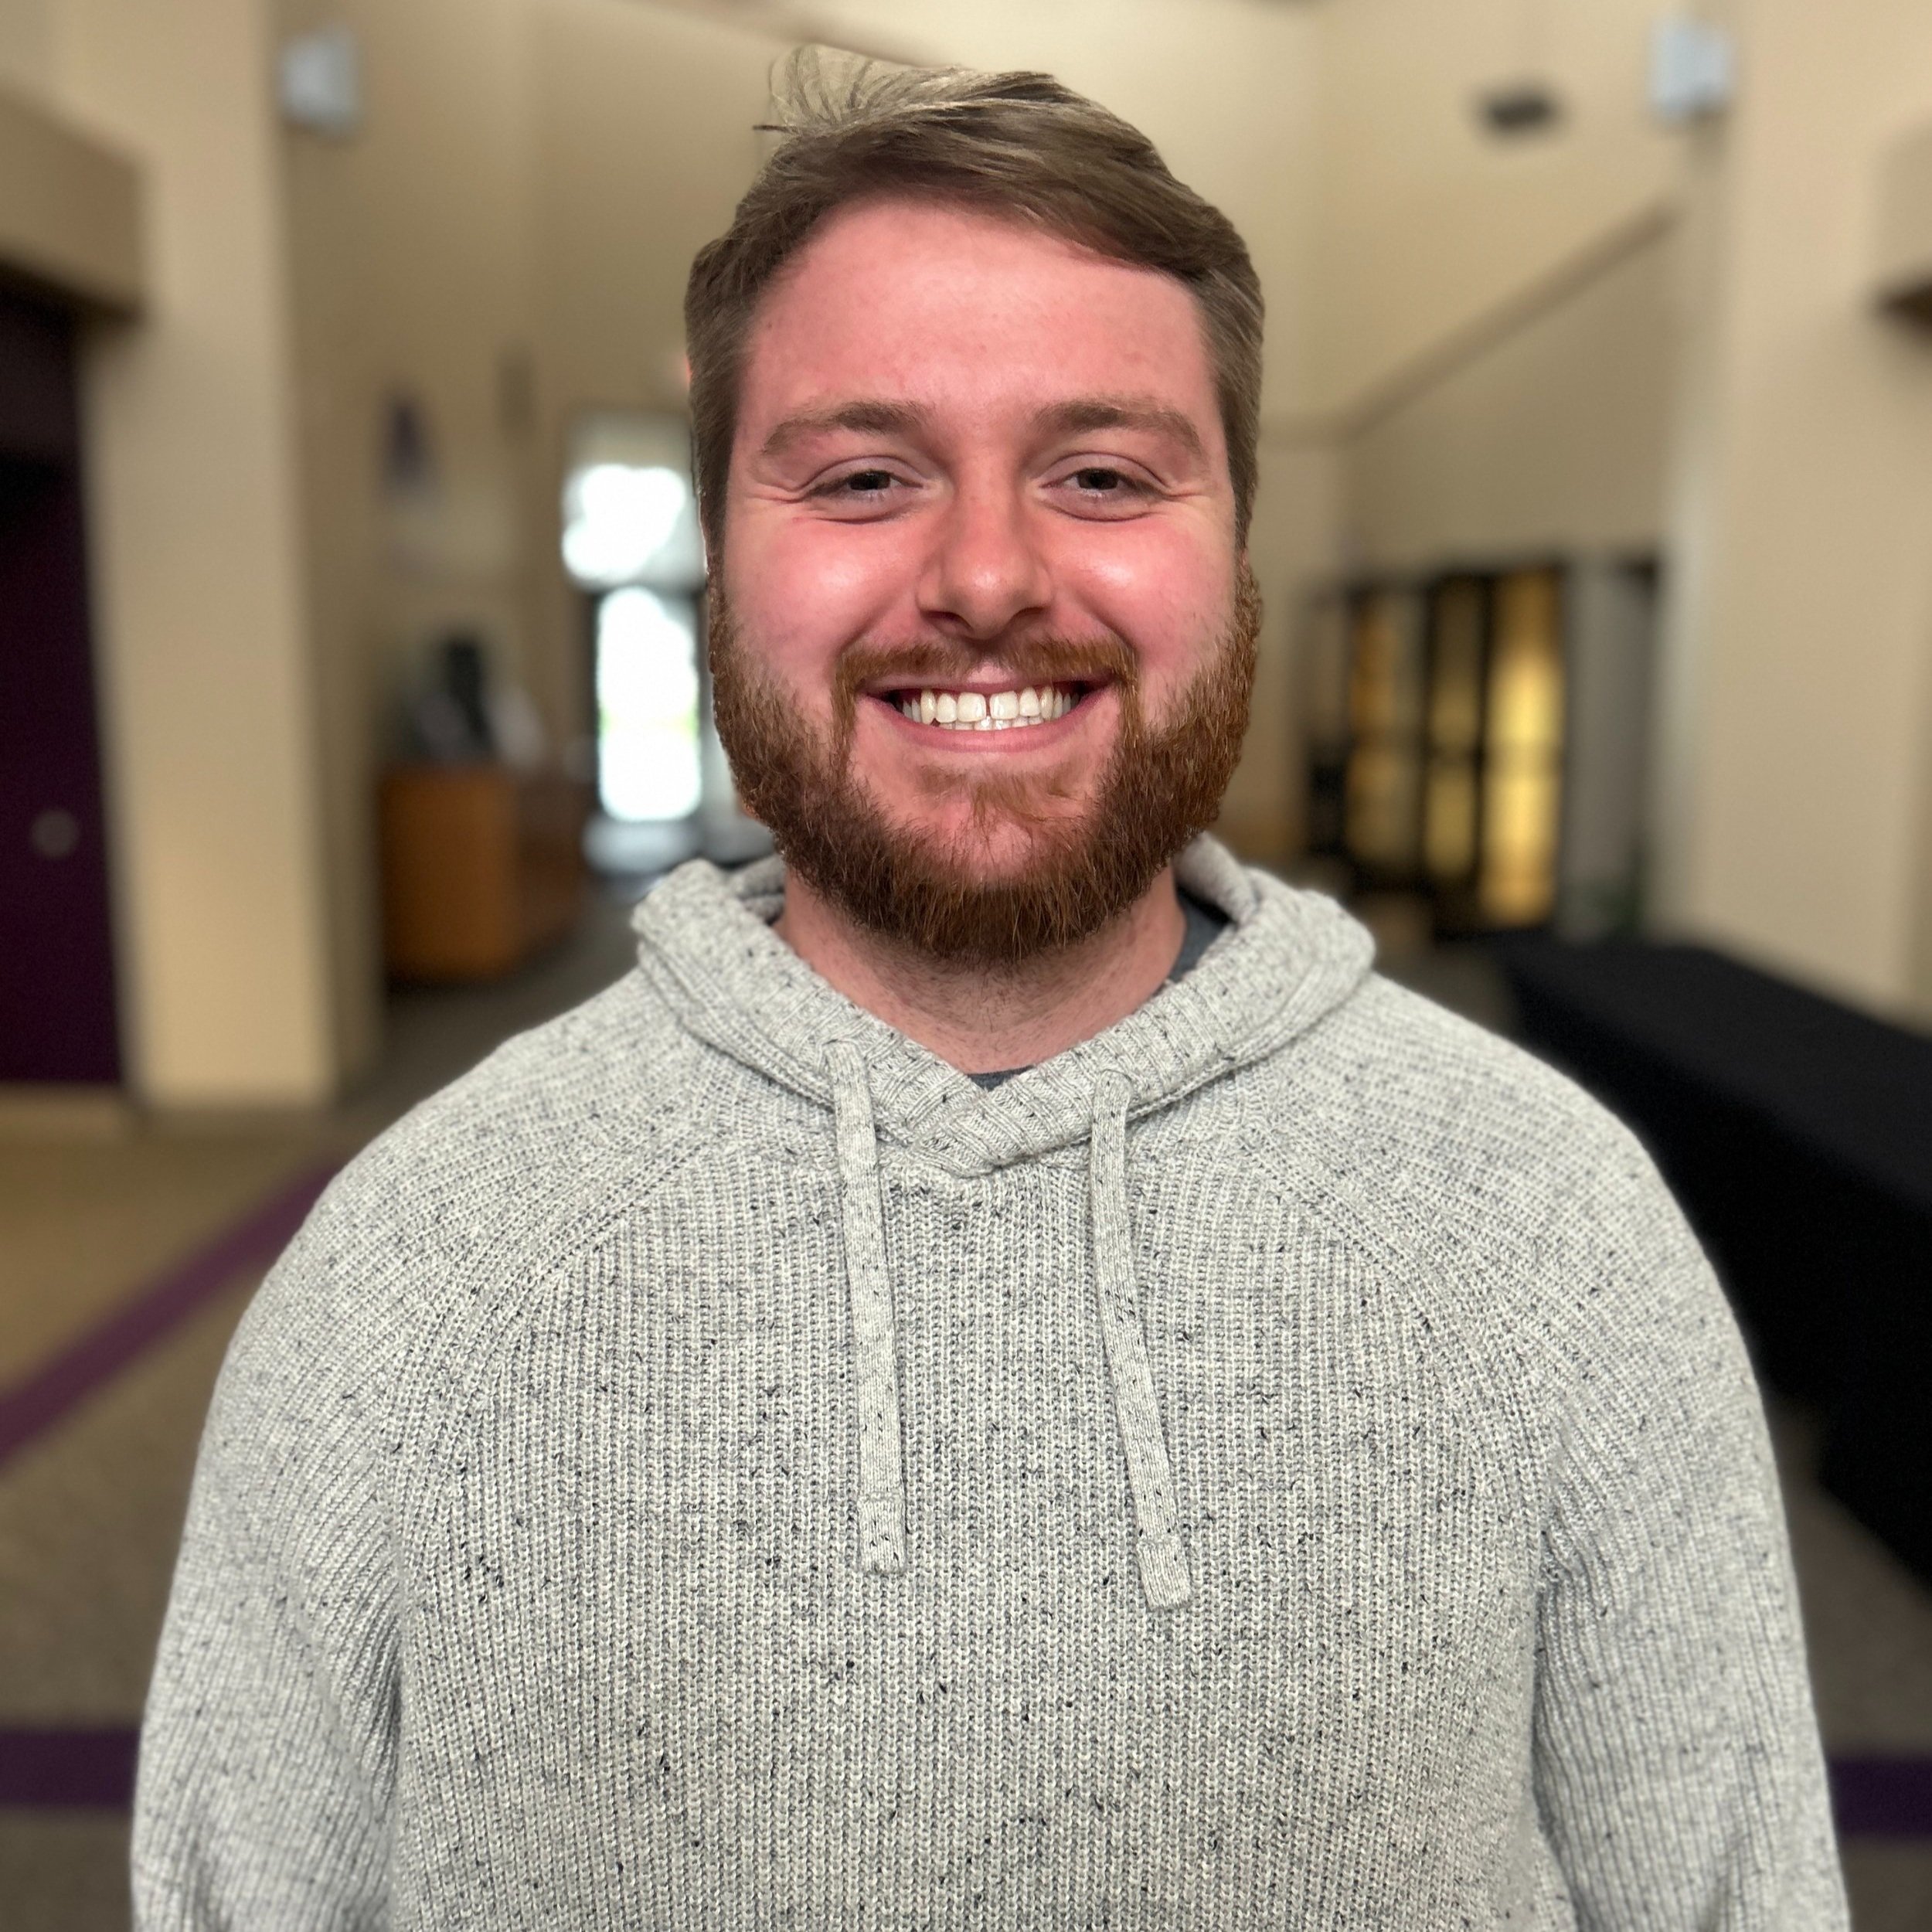 Jacob Hoover | Student Ministry